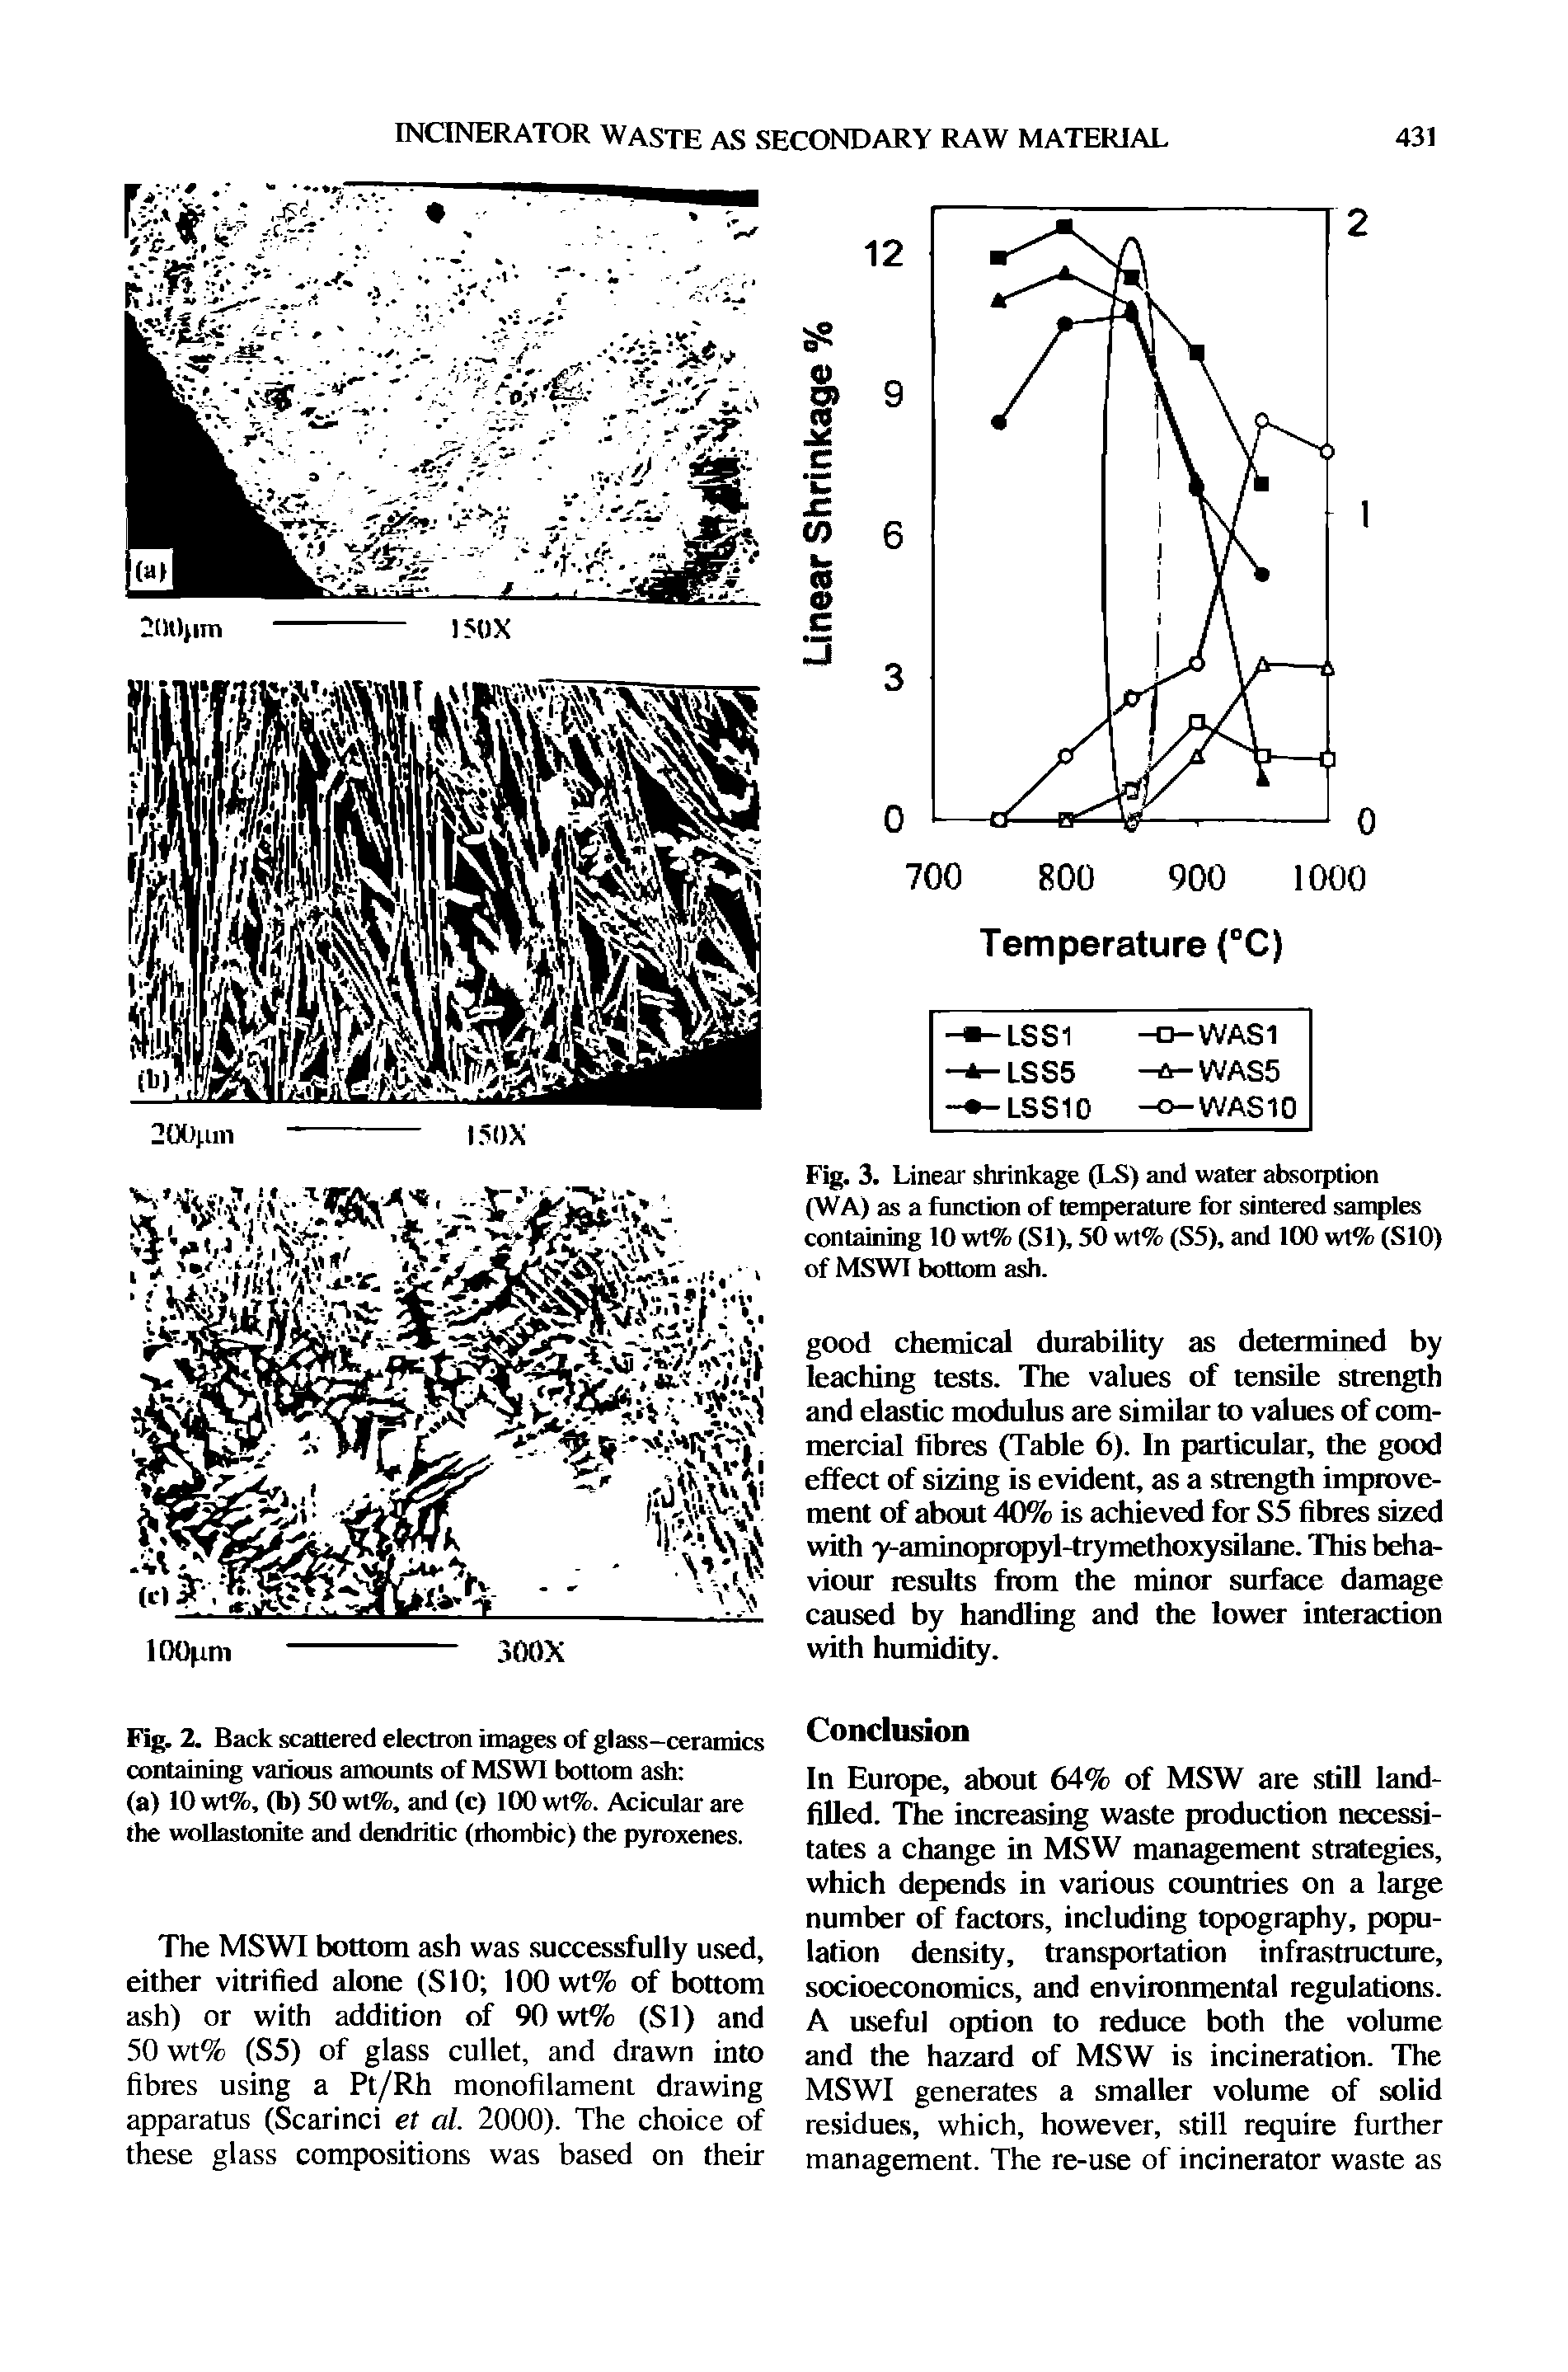 Fig. 2. Back scattered electron images of glass-ceramics containing various amounts of MSWI bottom ash ...